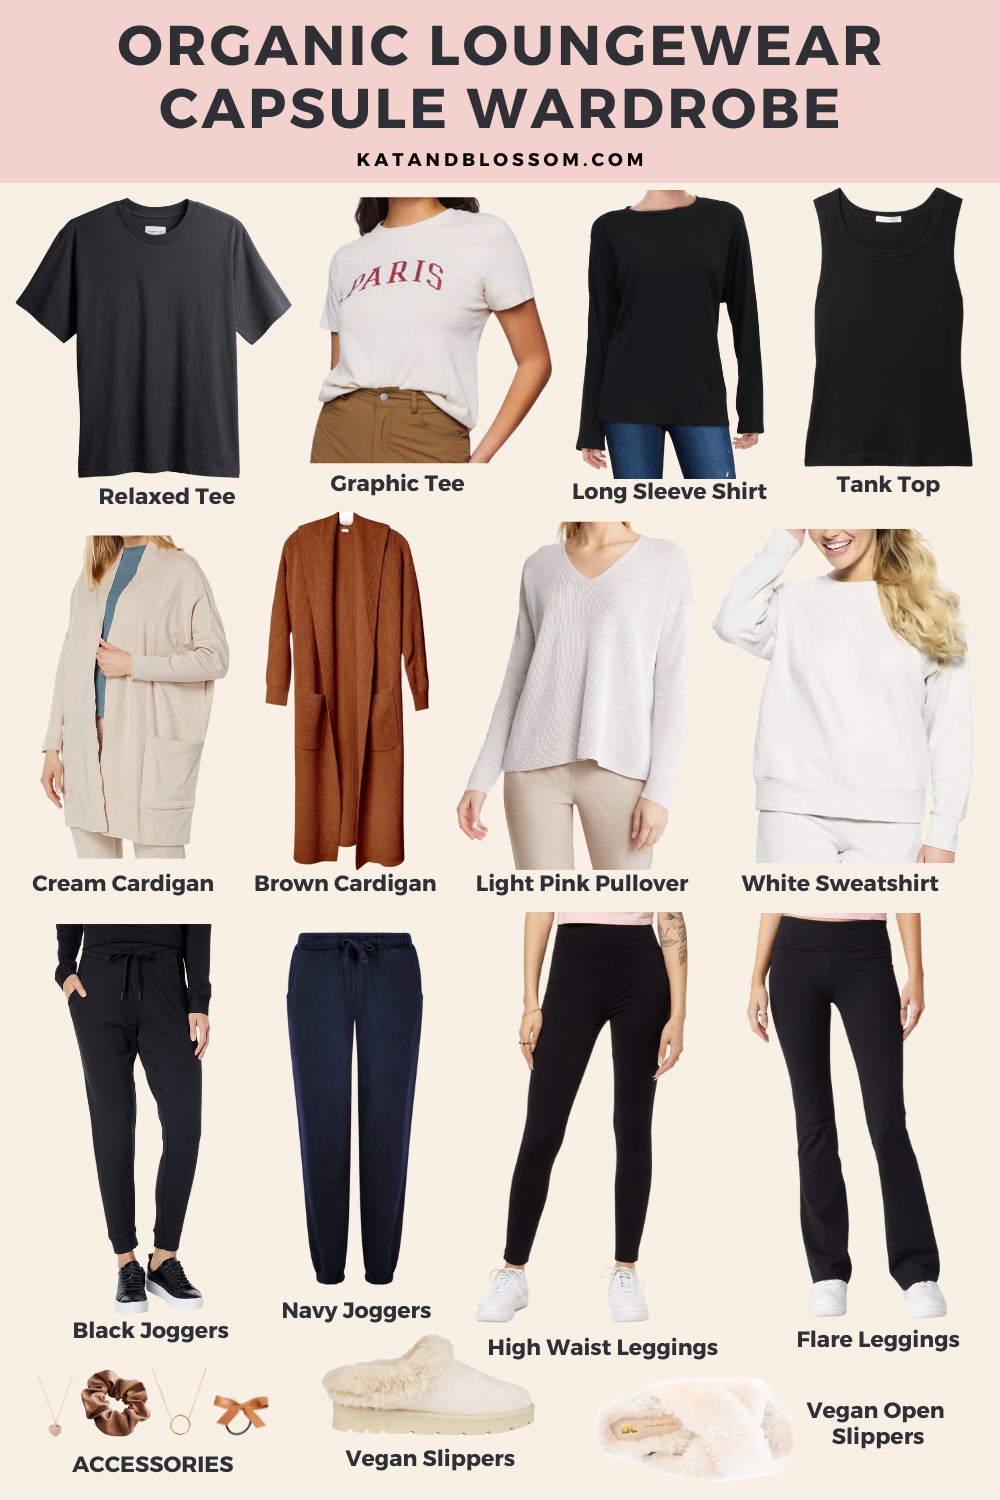 5 Steps For Building A Cozy Loungewear Capsule Wardrobe - The Good Trade